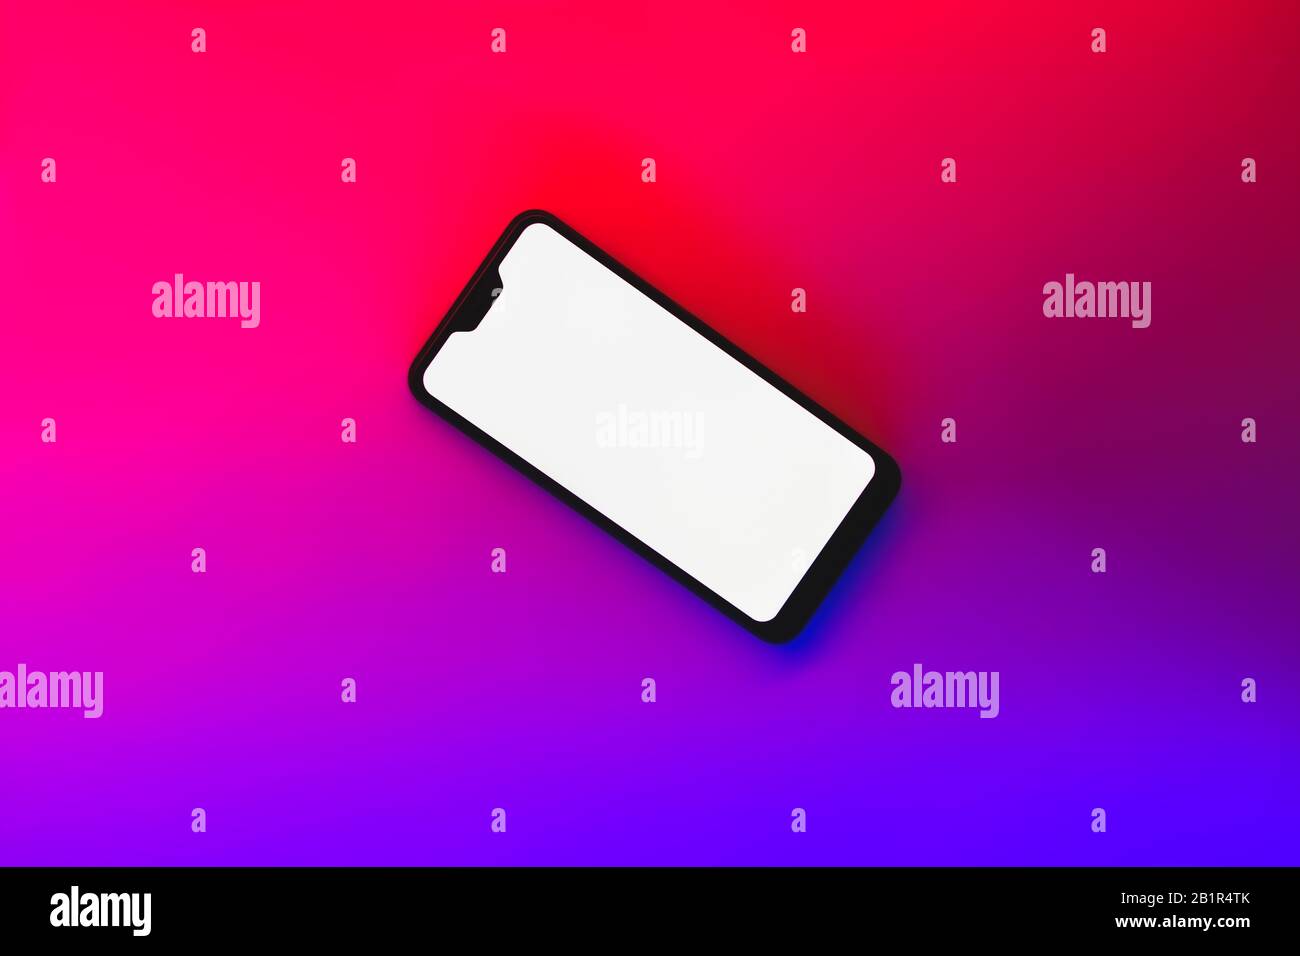 Modern generic smartphone in neon backdrop. Cellphone with white screen in vibrant blue and red background Stock Photo